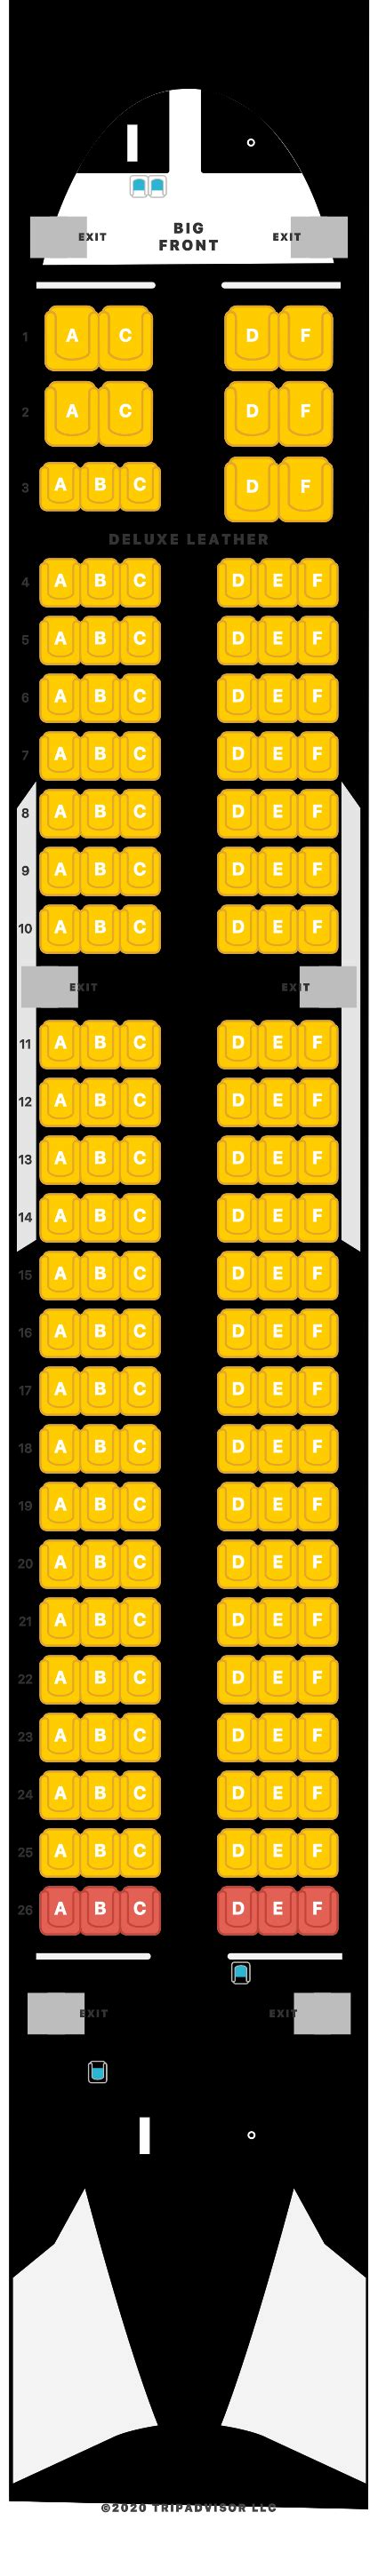 11 Seating Plan For Planes